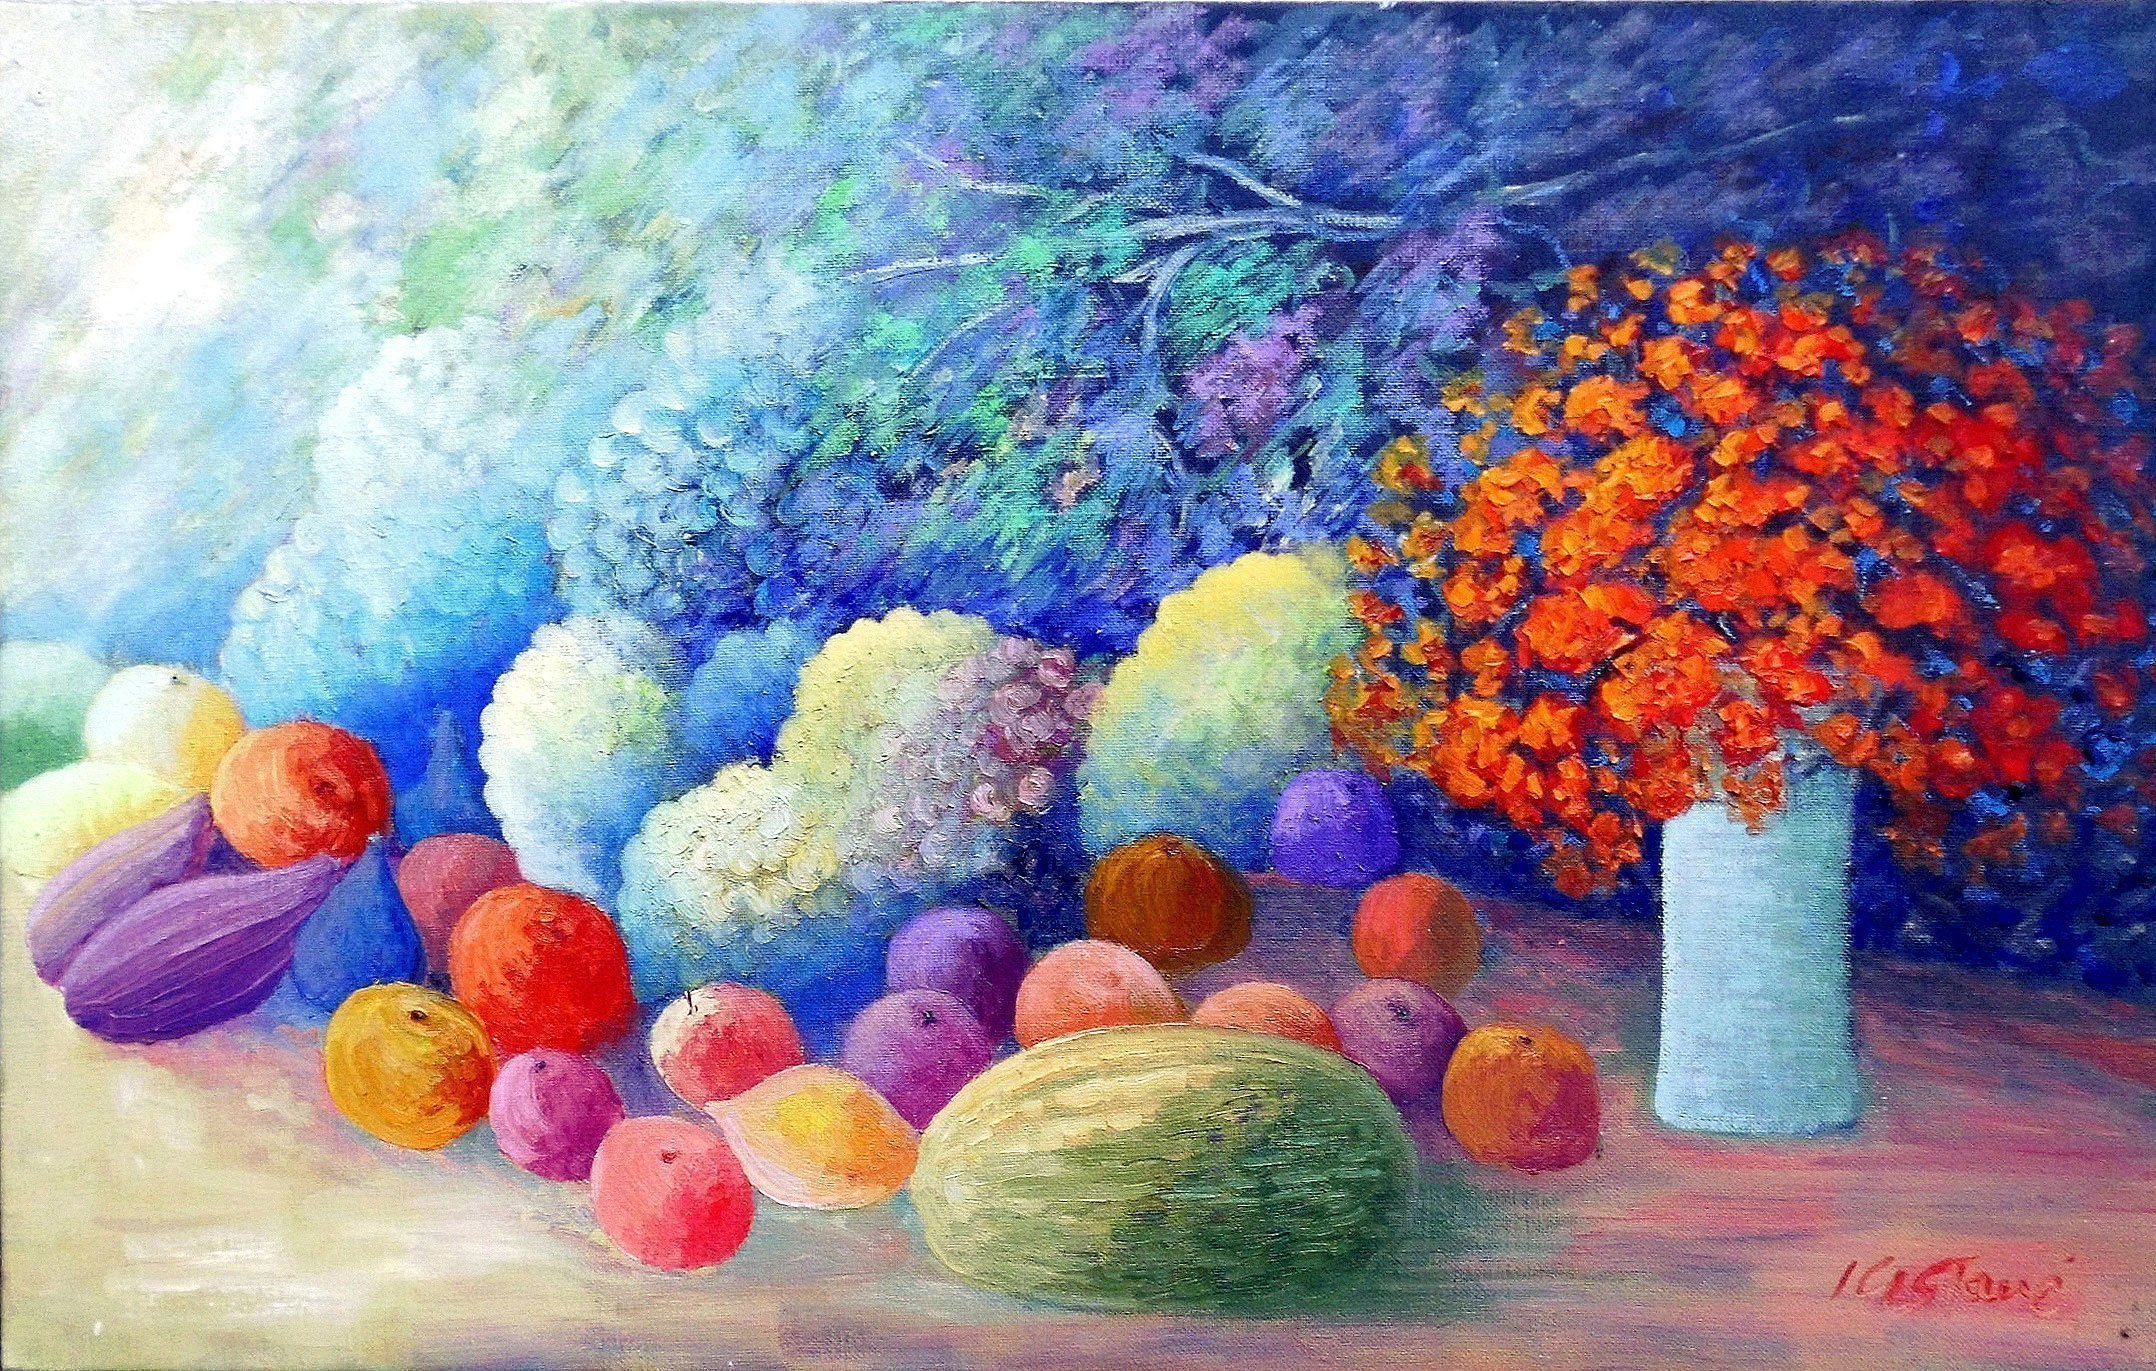 Artist: Isidro Cistare - Title: bodegon luces y sombras - Medium: Oil Painting - Year: 2006